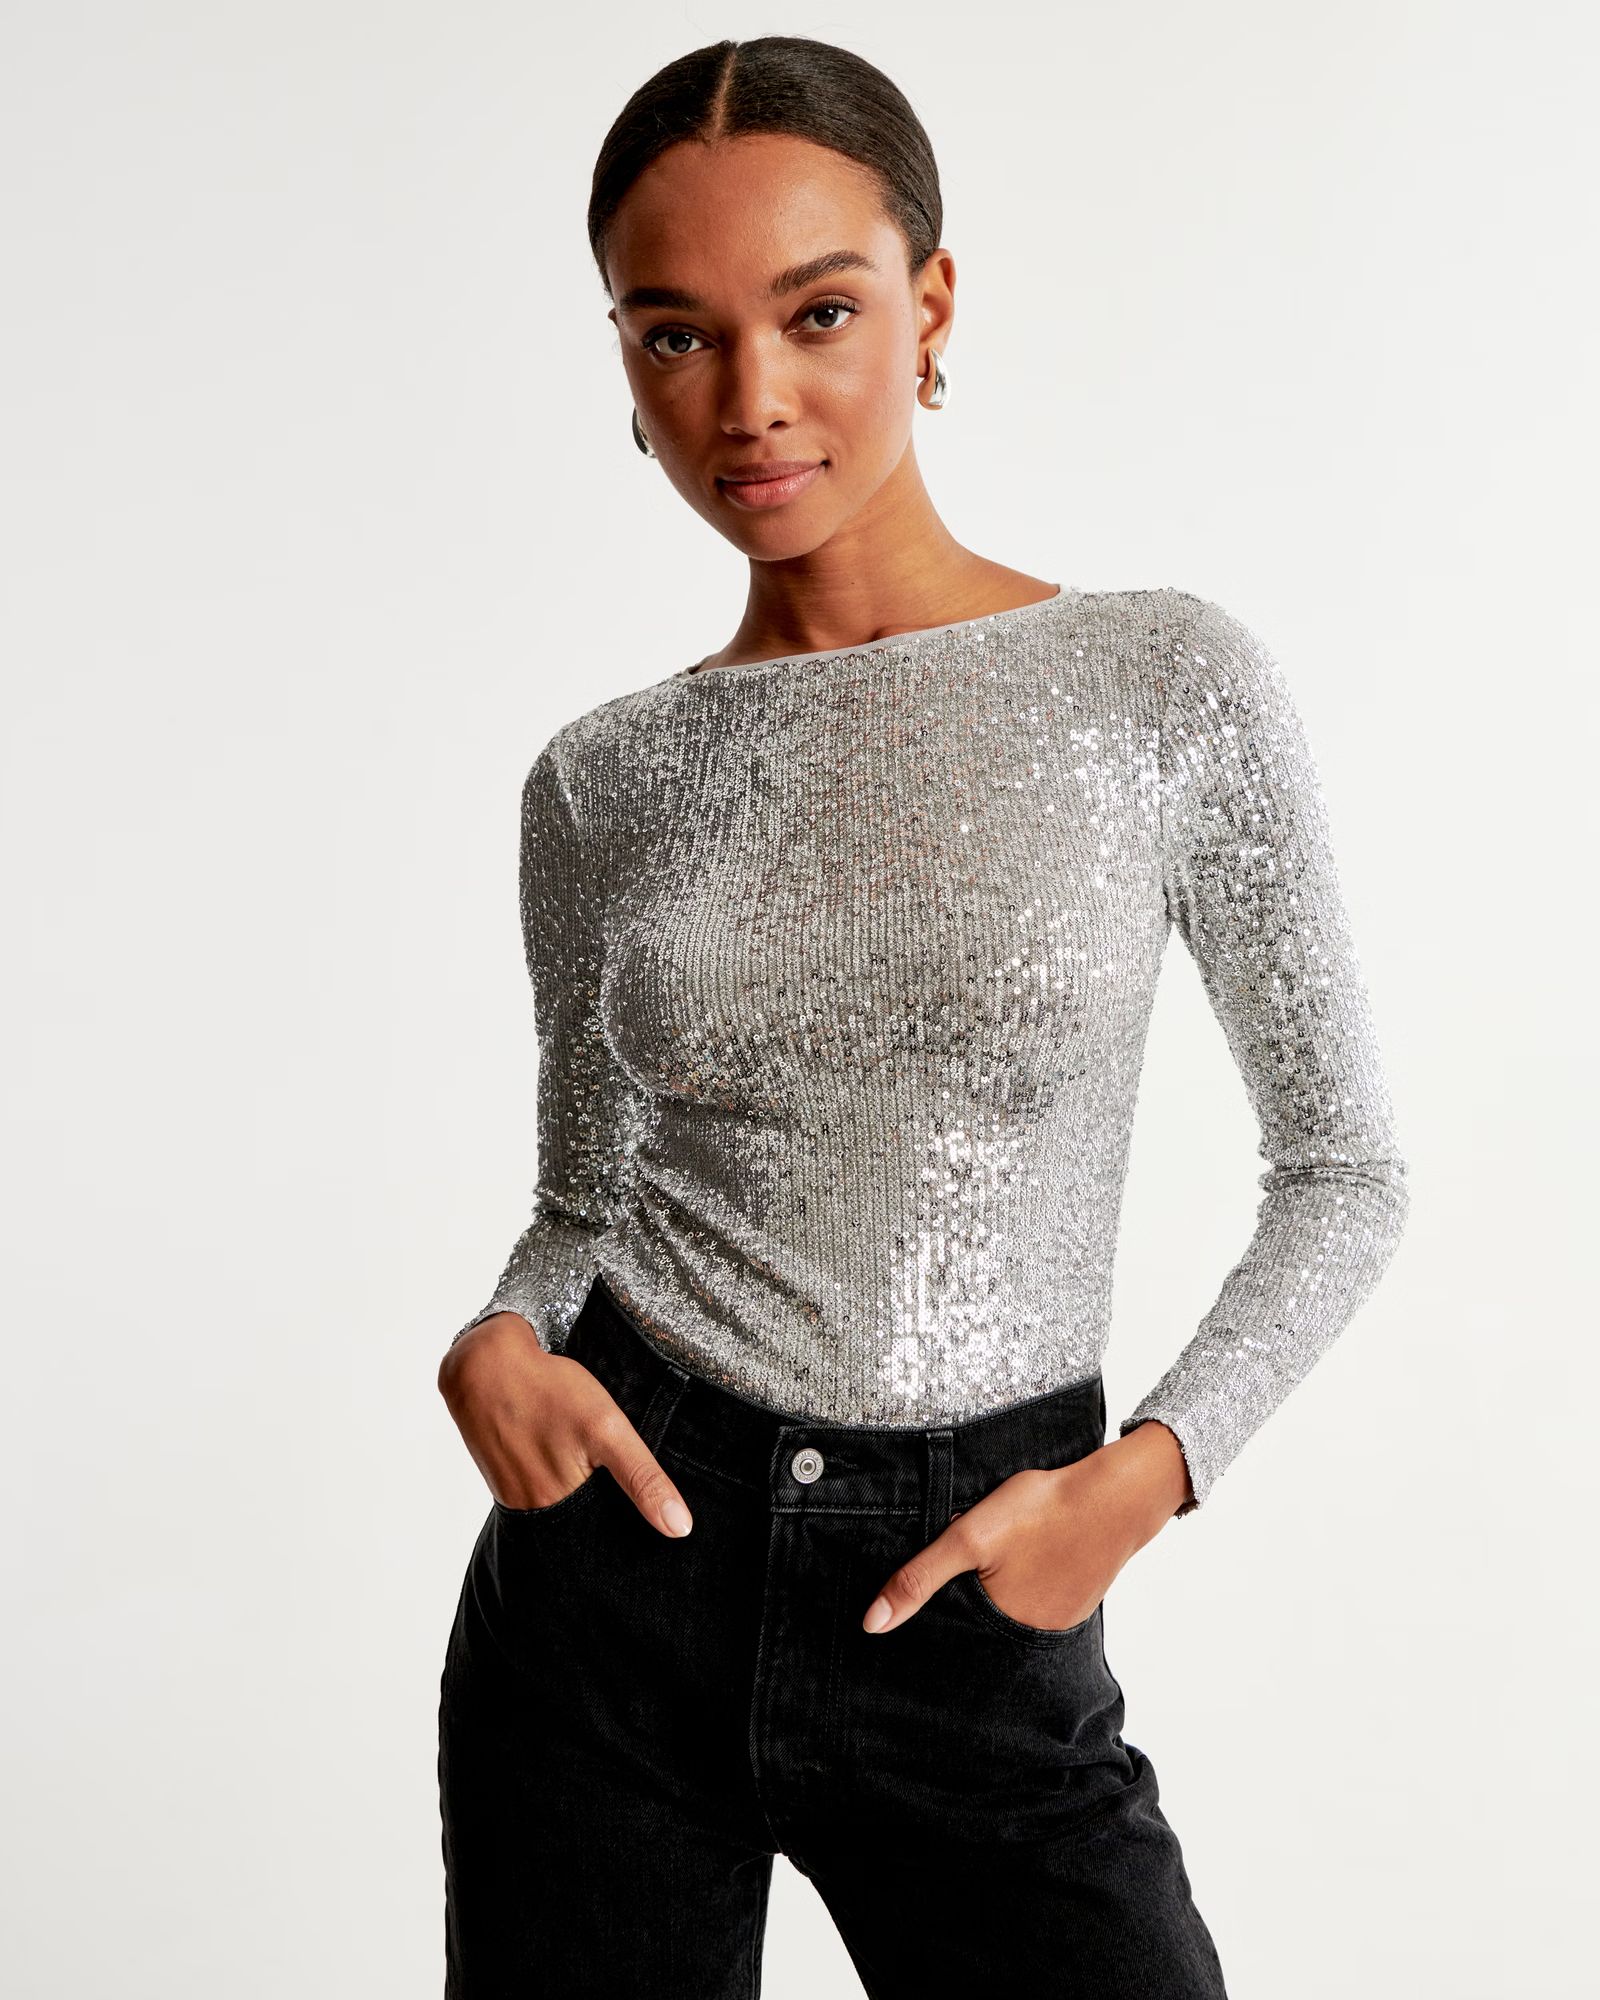 Women's Long-Sleeve Sequin Boatneck Top | Women's New Arrivals | Abercrombie.com | Abercrombie & Fitch (US)